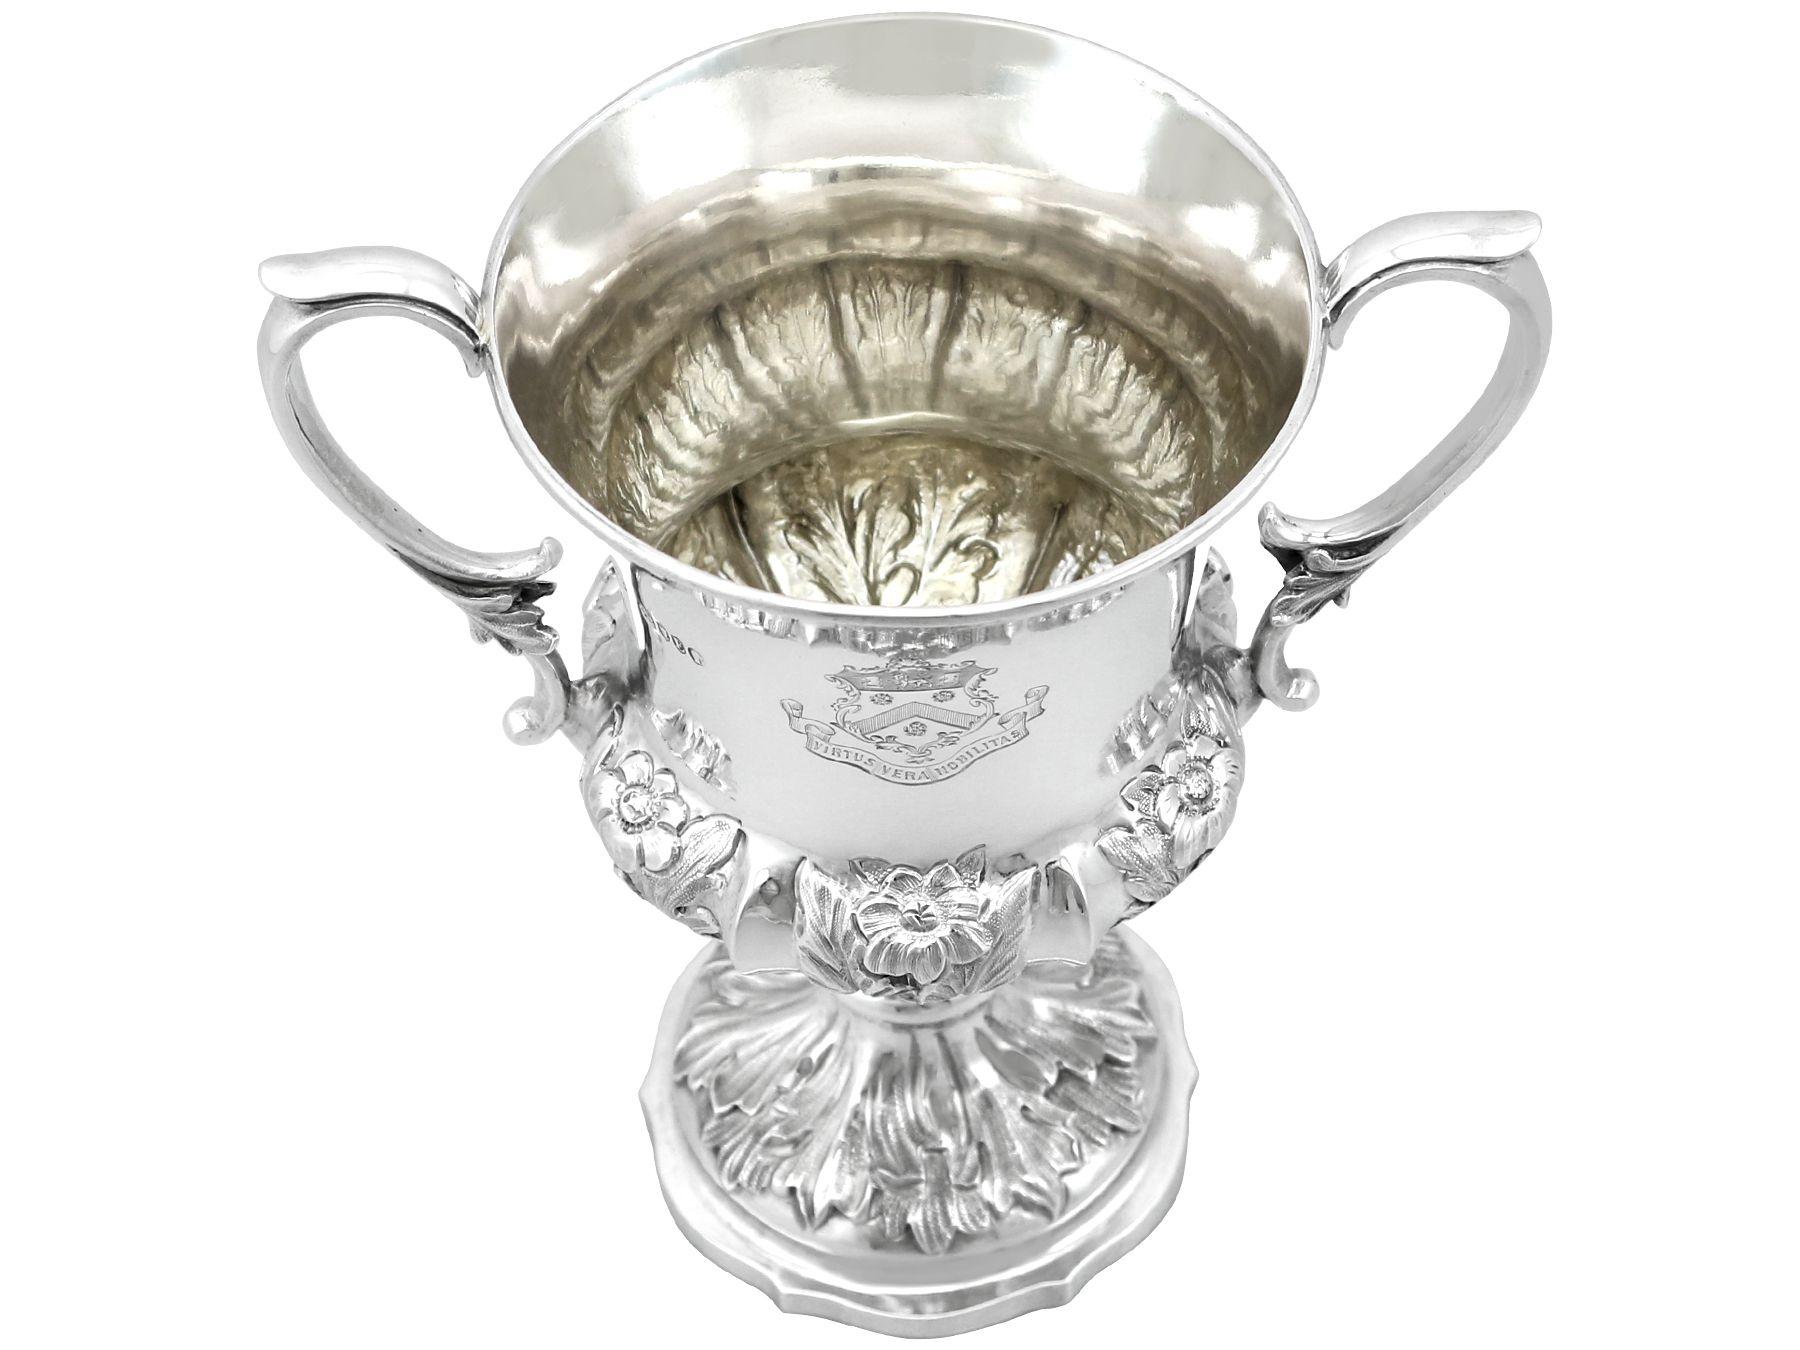 Antique Sterling Silver Cup In Excellent Condition For Sale In Jesmond, Newcastle Upon Tyne